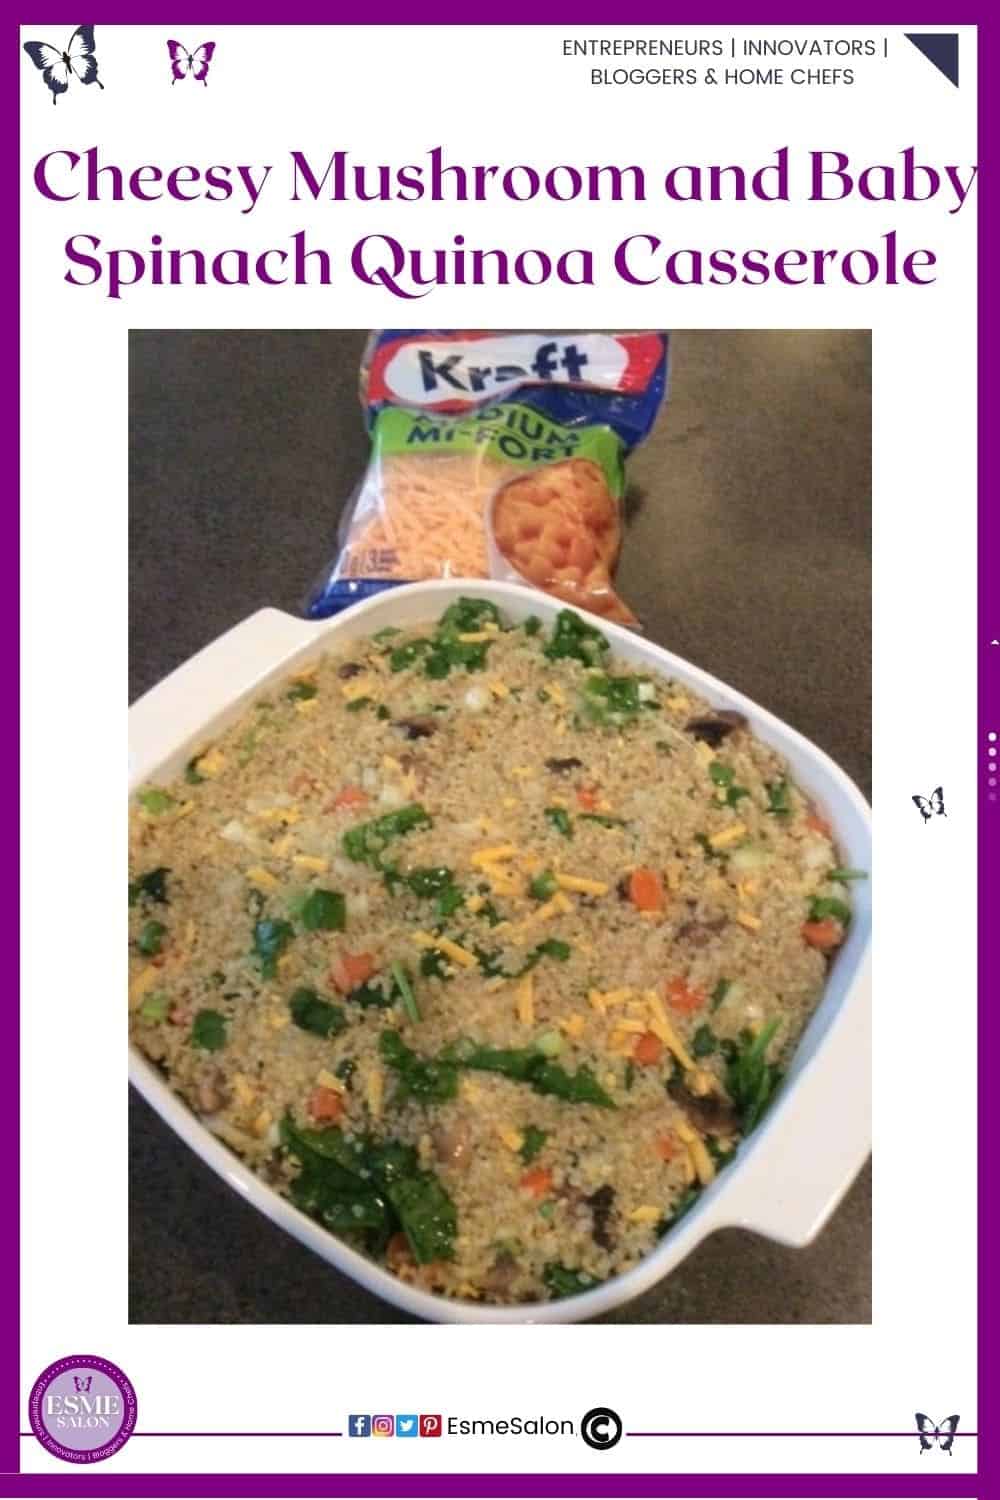 an image of a Baby Spinach Quinoa Casserole still to be baked